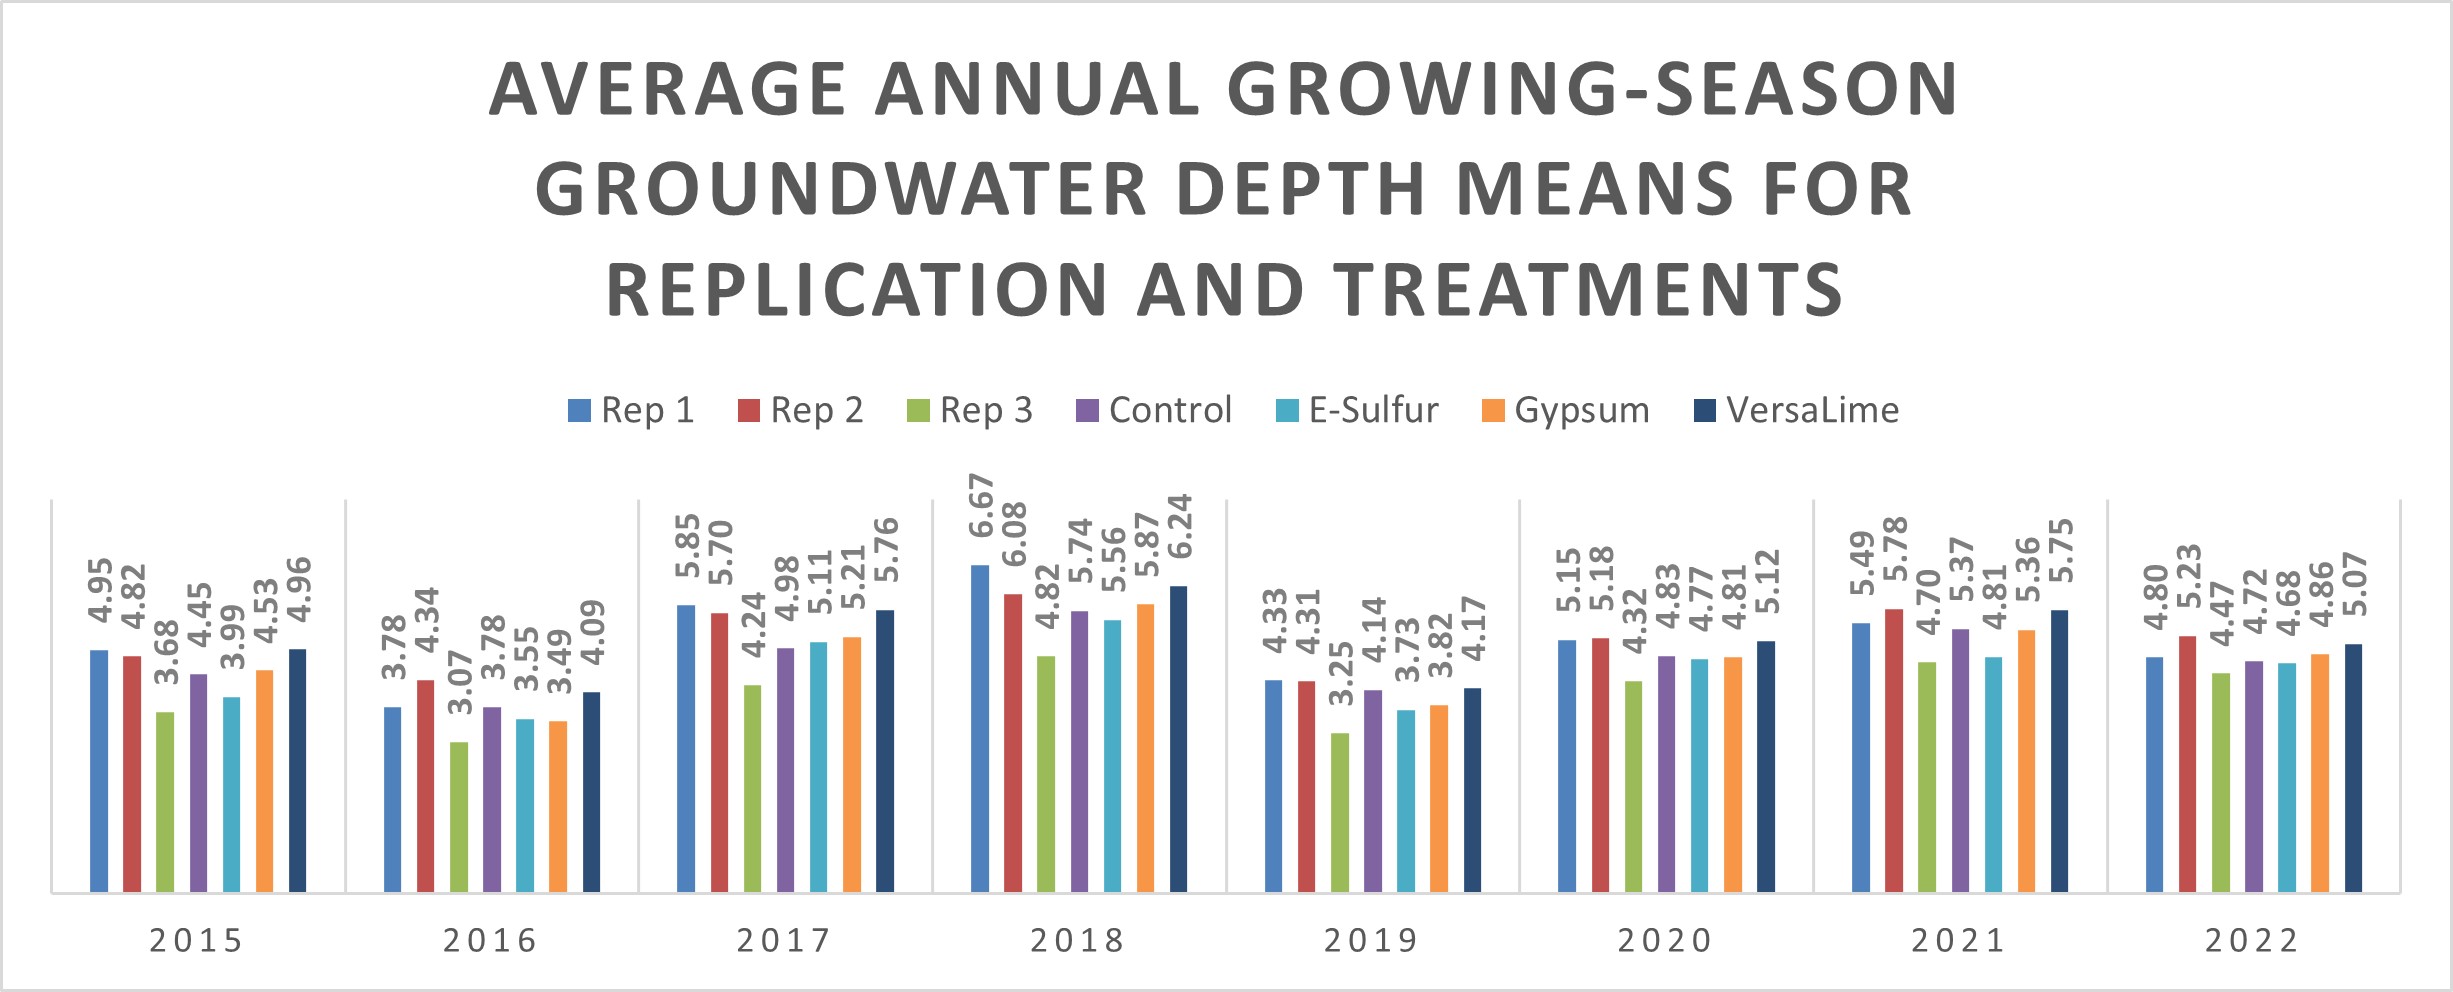 Average Annual Growing-season Groundwater Depth Means for Replication and Treatments 2015-2022